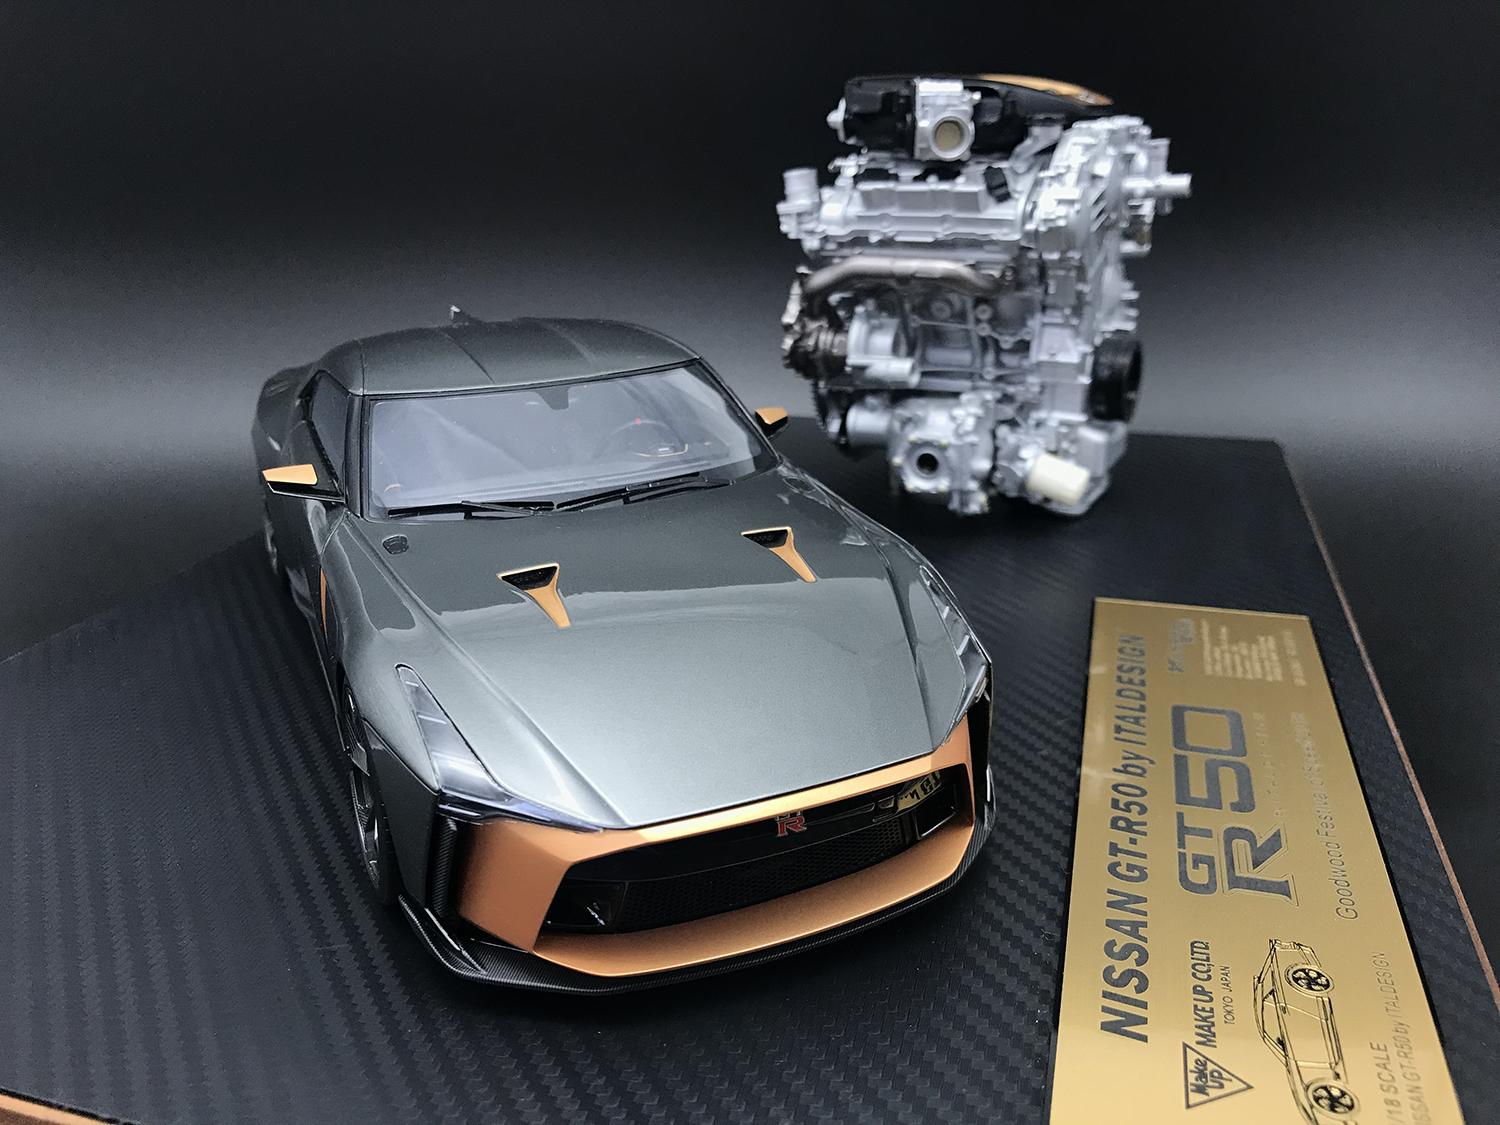 「～Master‛s Series～ NISSAN GT-R50 by Italdesign 2018 Goodwood仕様」の全景